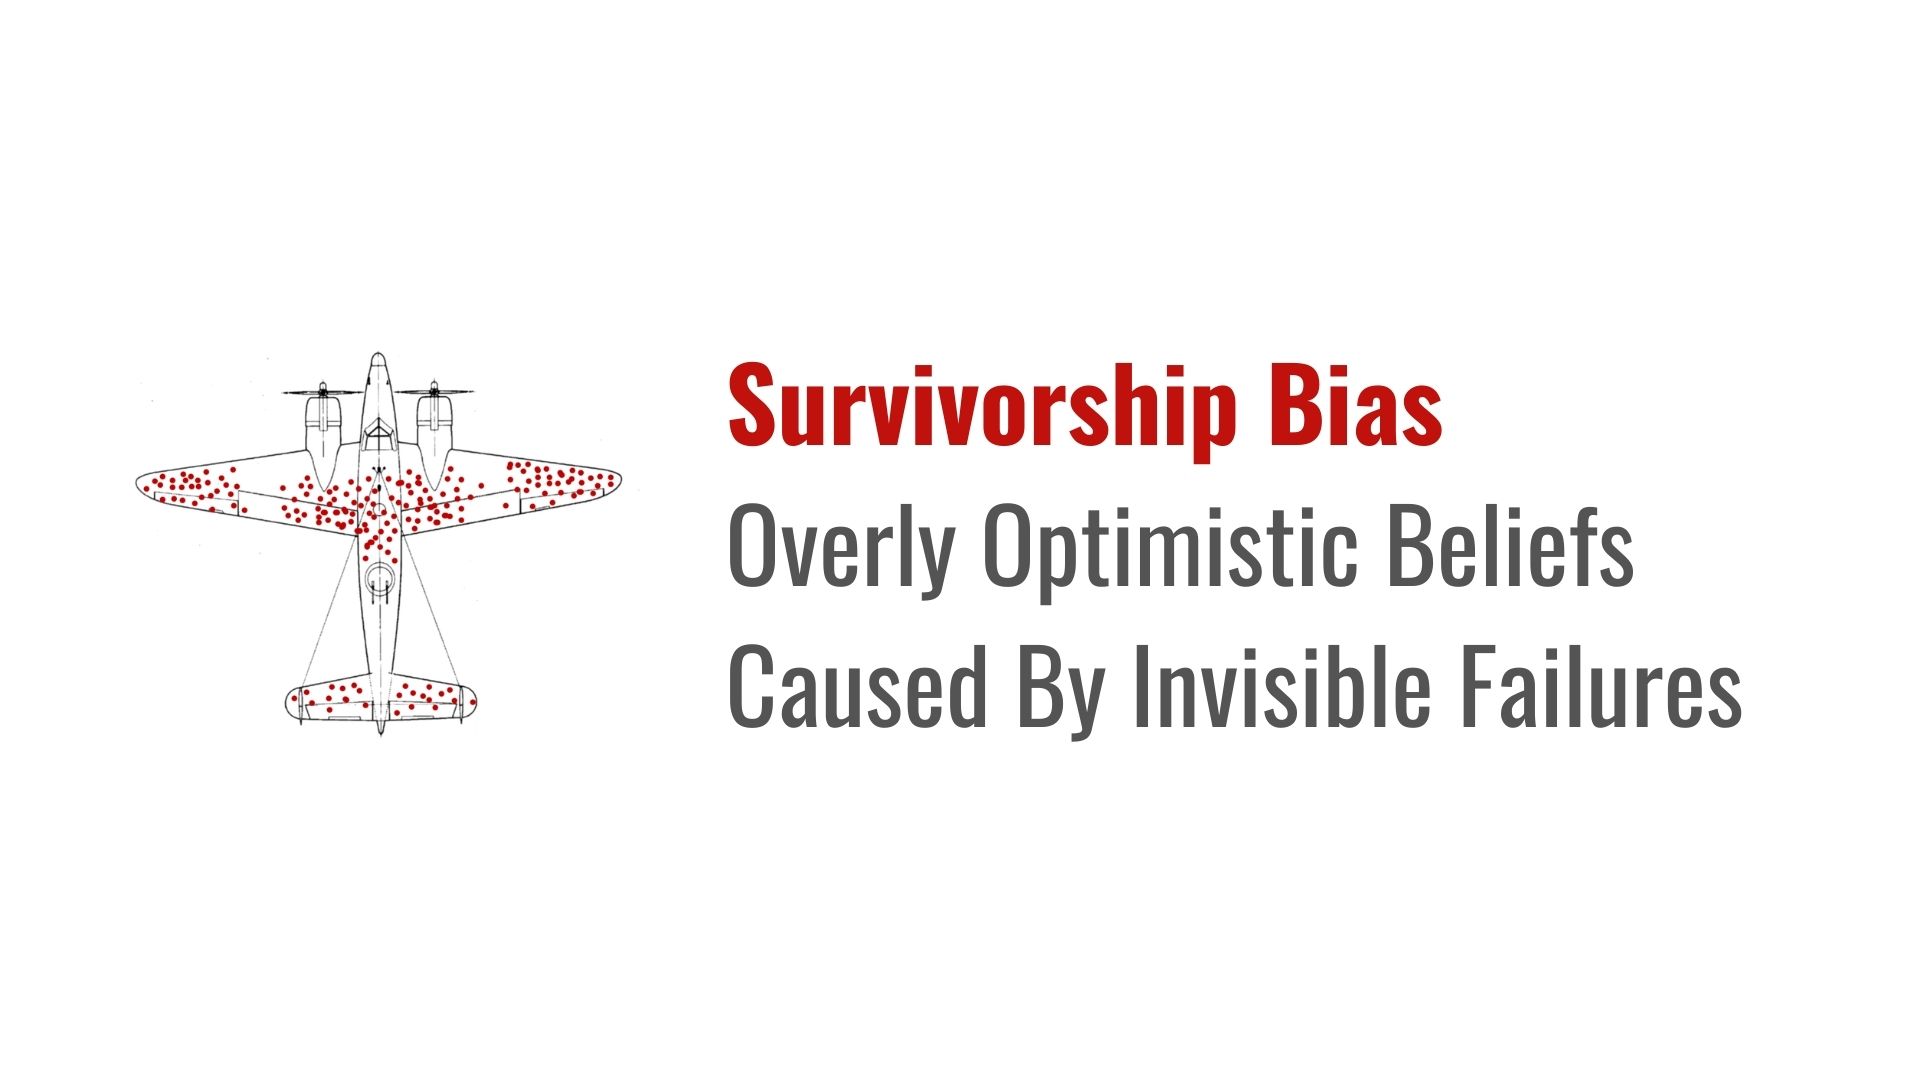 Survivorship Bias — Overly Optimistic Beliefs Caused By Invisible